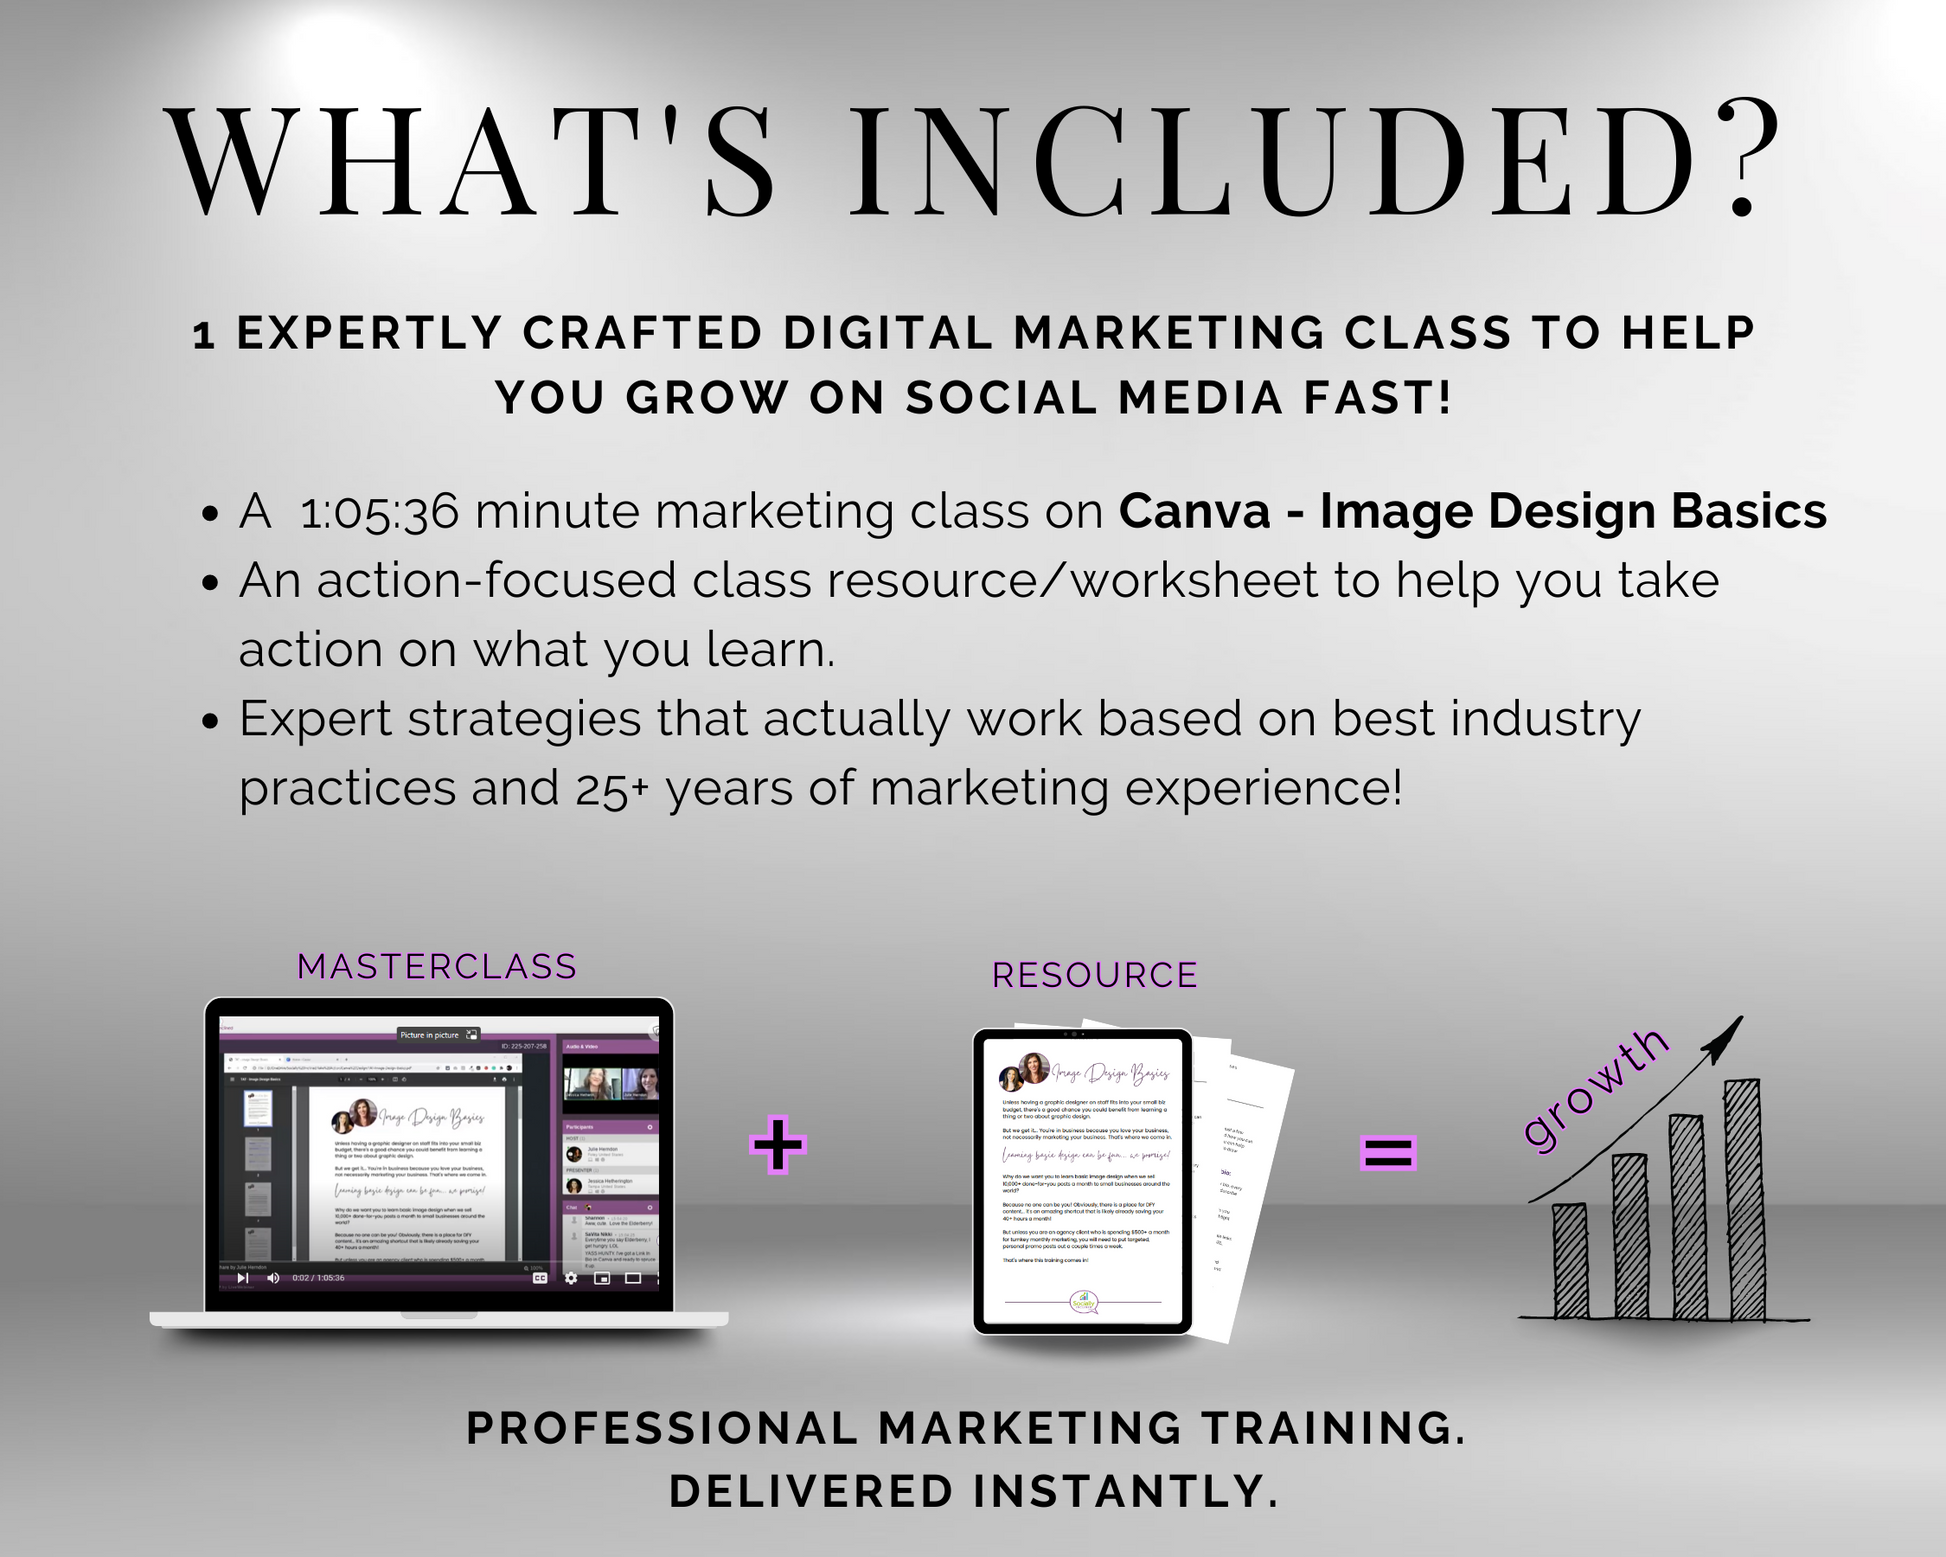 Discover what topics are covered in the TAT - Canva - Image Design Basics Masterclass by Get Socially Inclined.